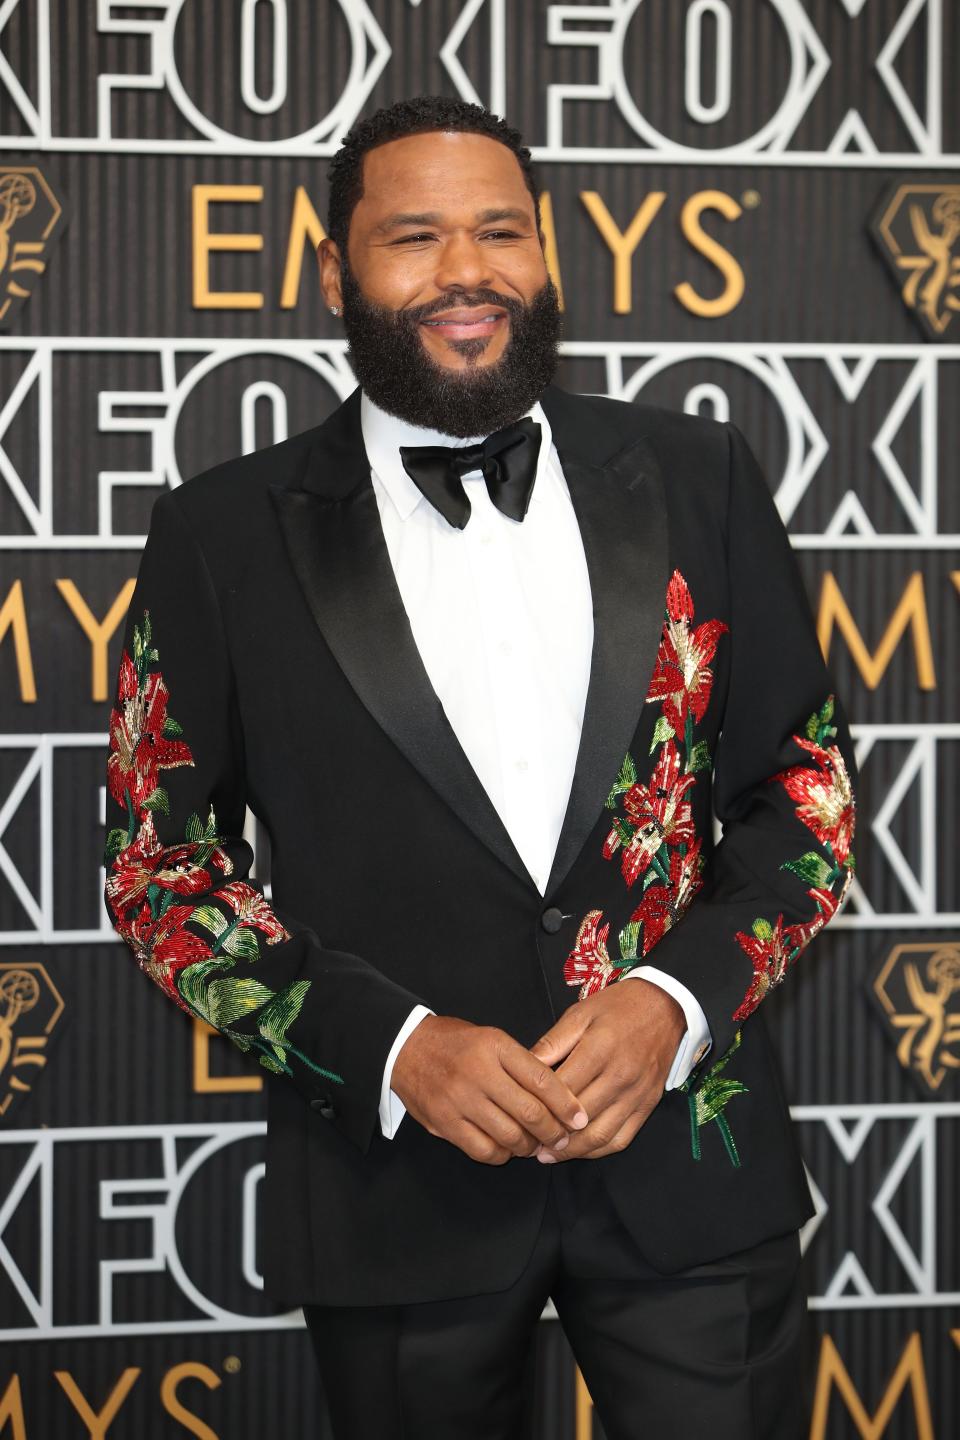 Emmys host Anthony Anderson on the red carpet at the 75th Emmy Awards.